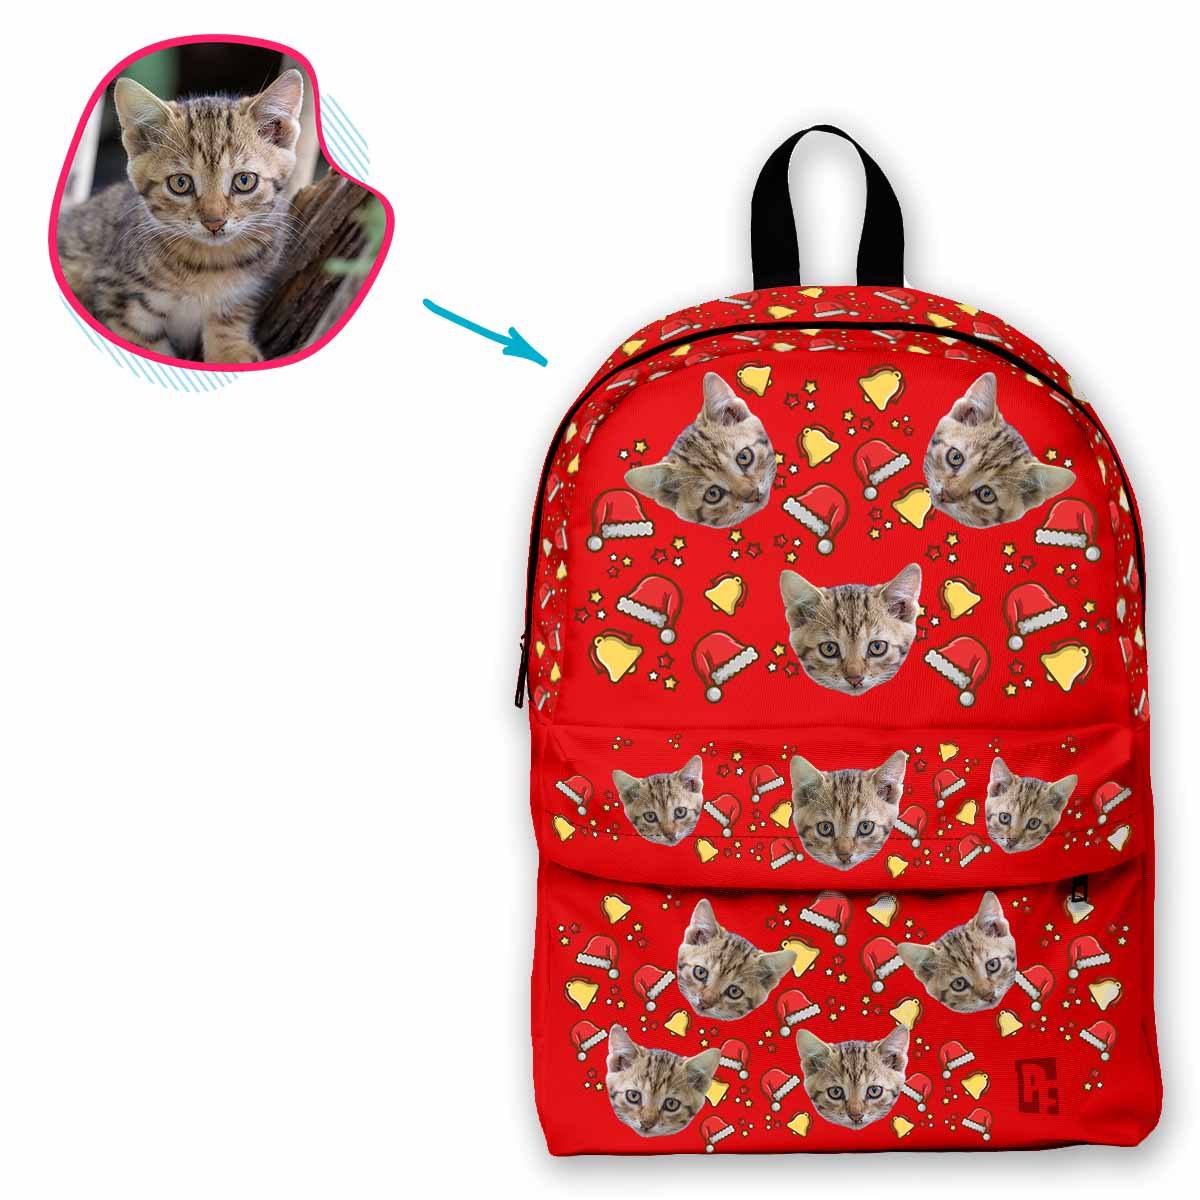 red Santa's Hat classic backpack personalized with photo of face printed on it